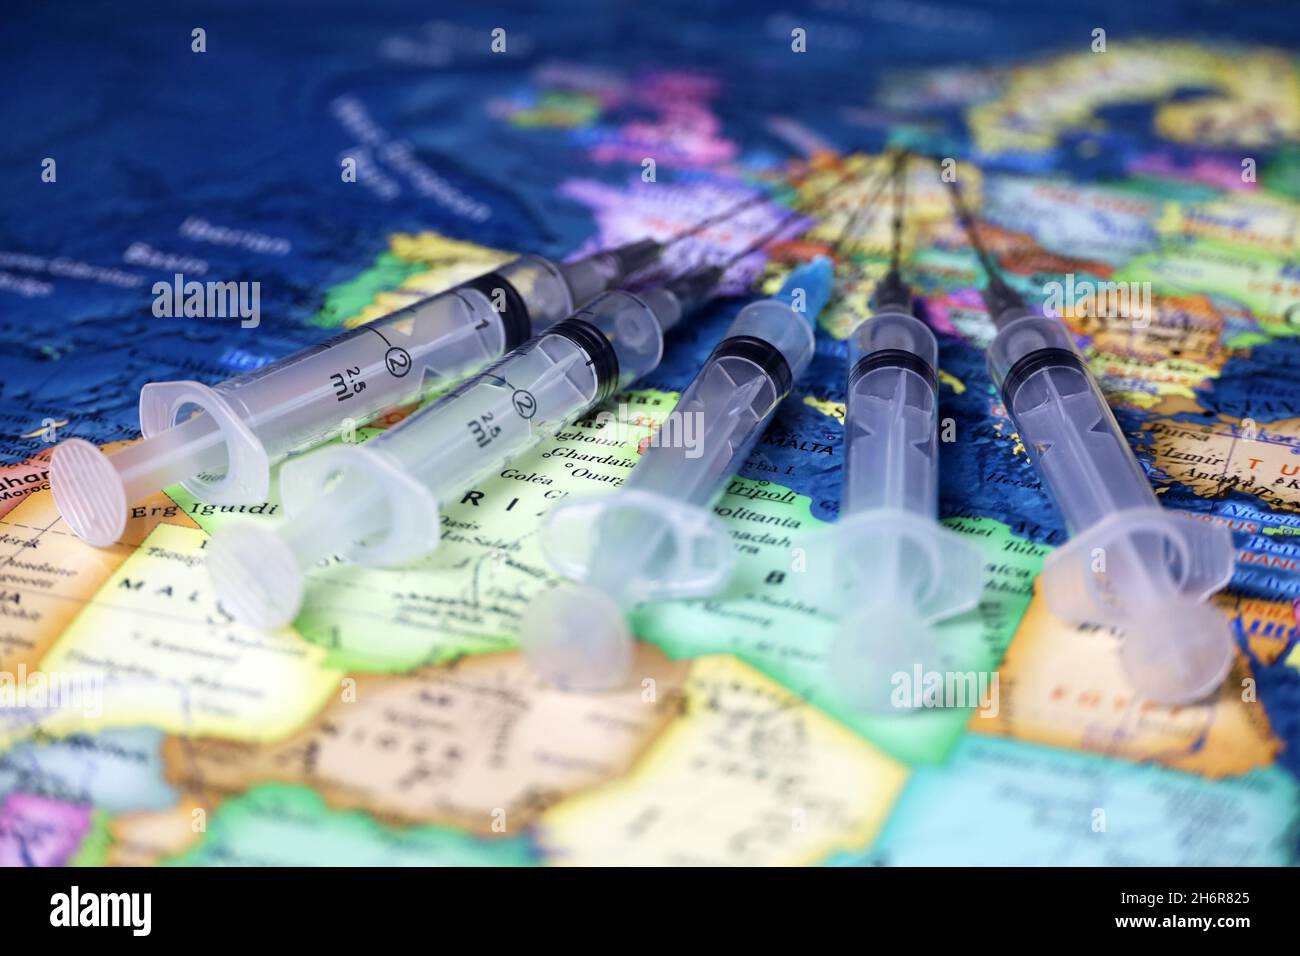 Syringes on the map of Europe and North Africa, selective focus. Concept of vaccination in EU countries during covid-19 pandemic Stock Photo